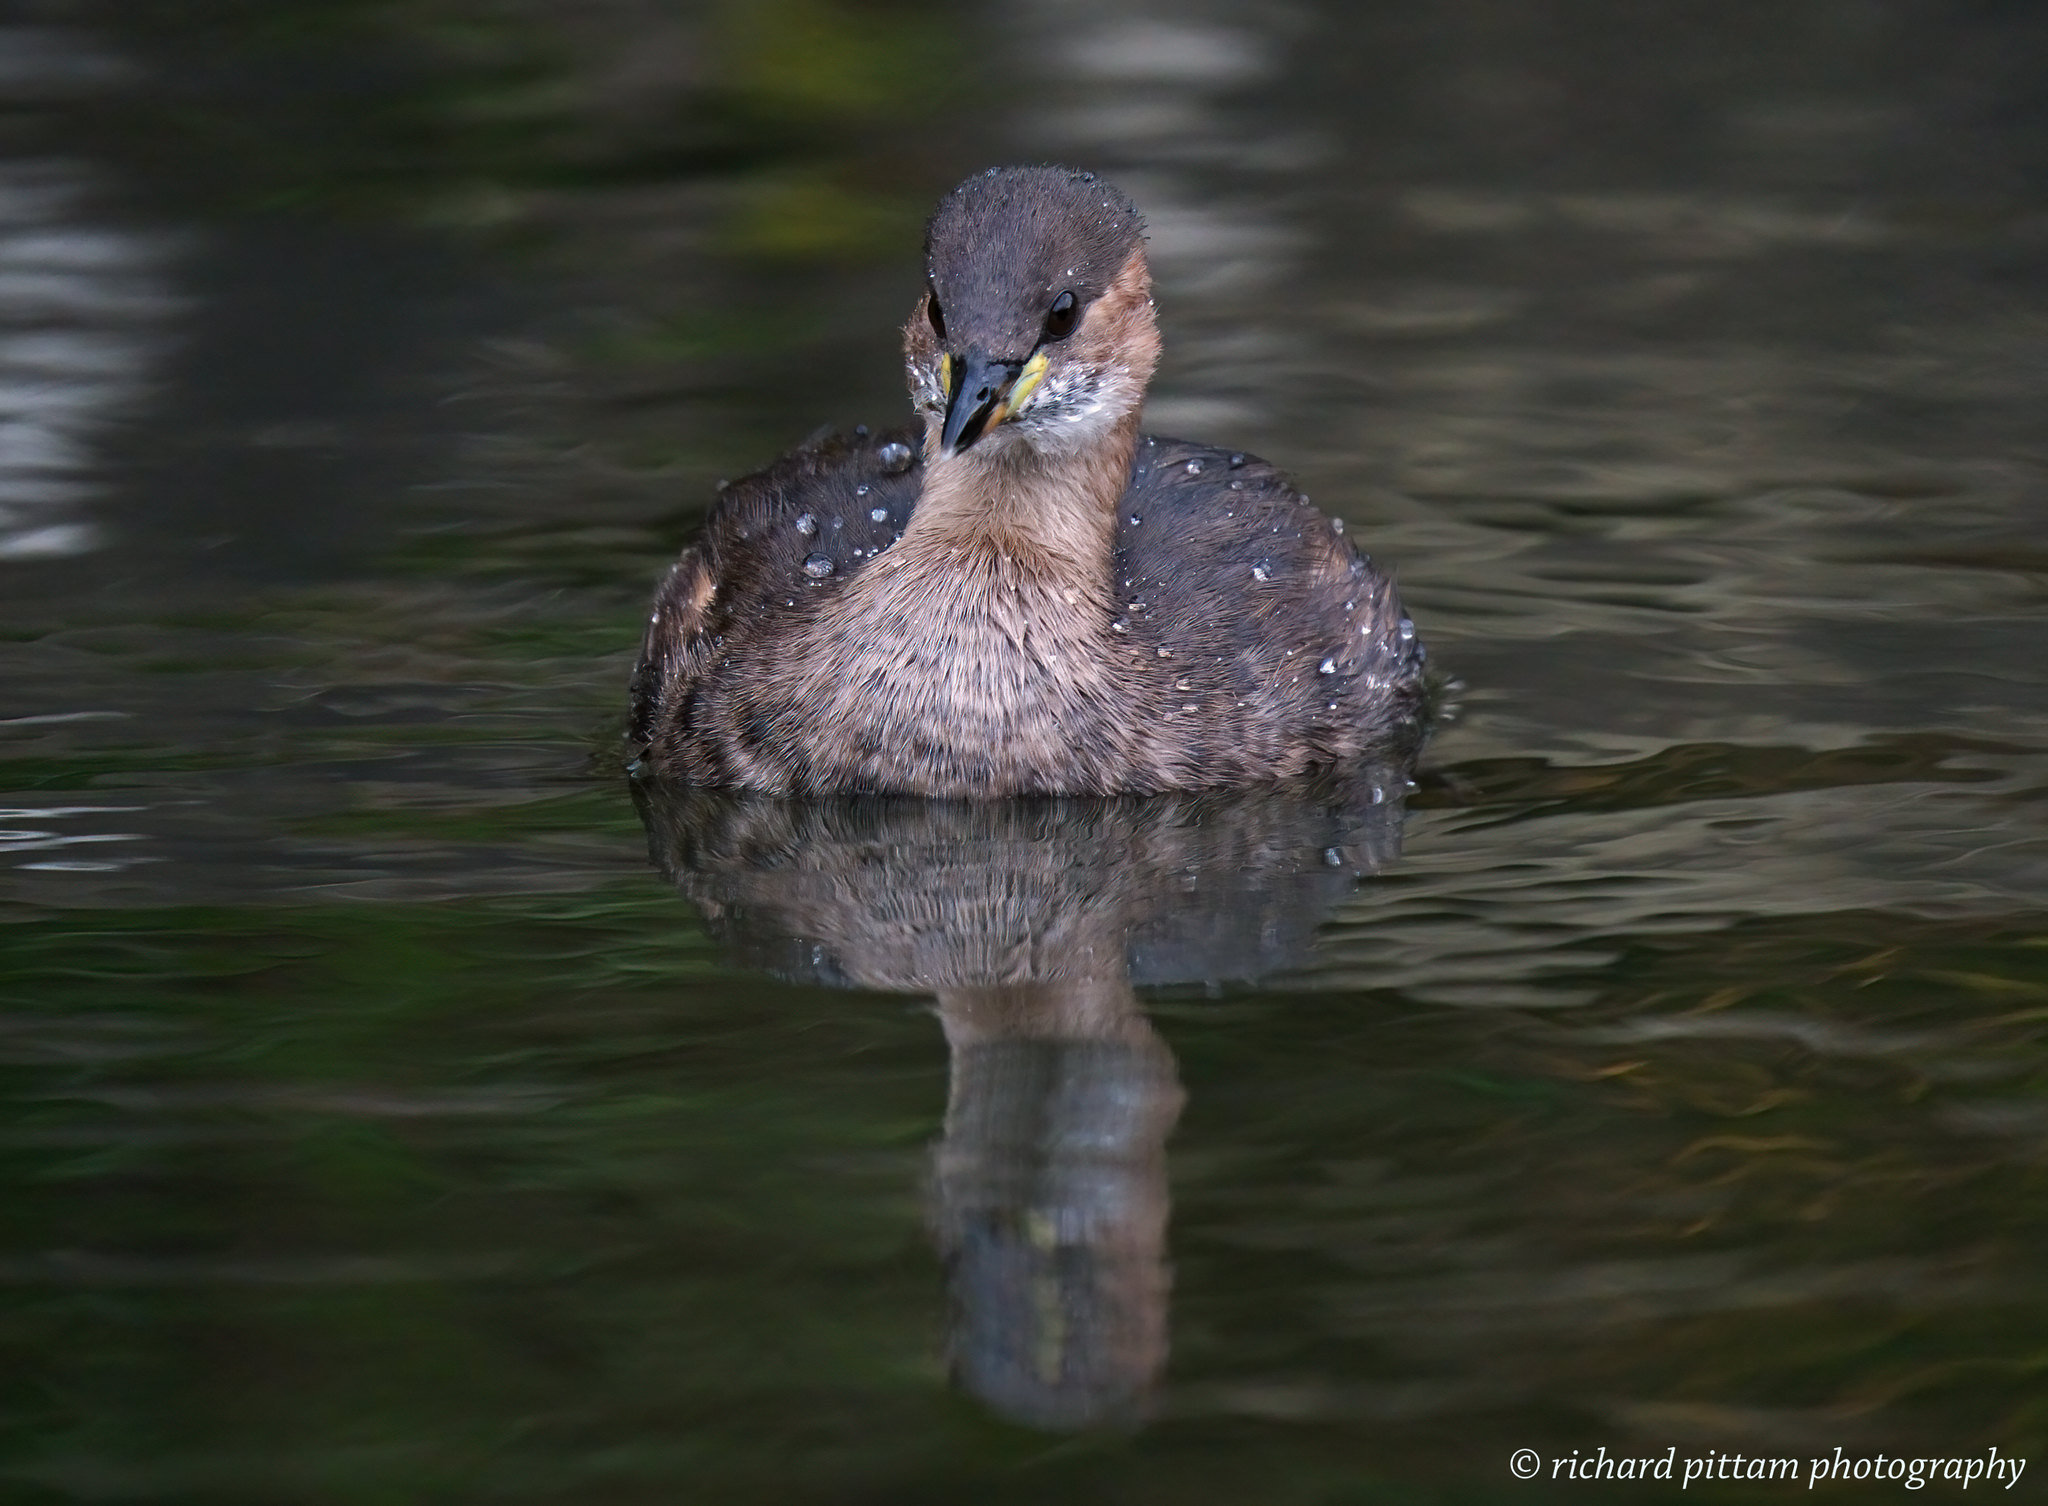 Little Grebe [ Dabchick] - low light testing with A7R4 and 200-600mm